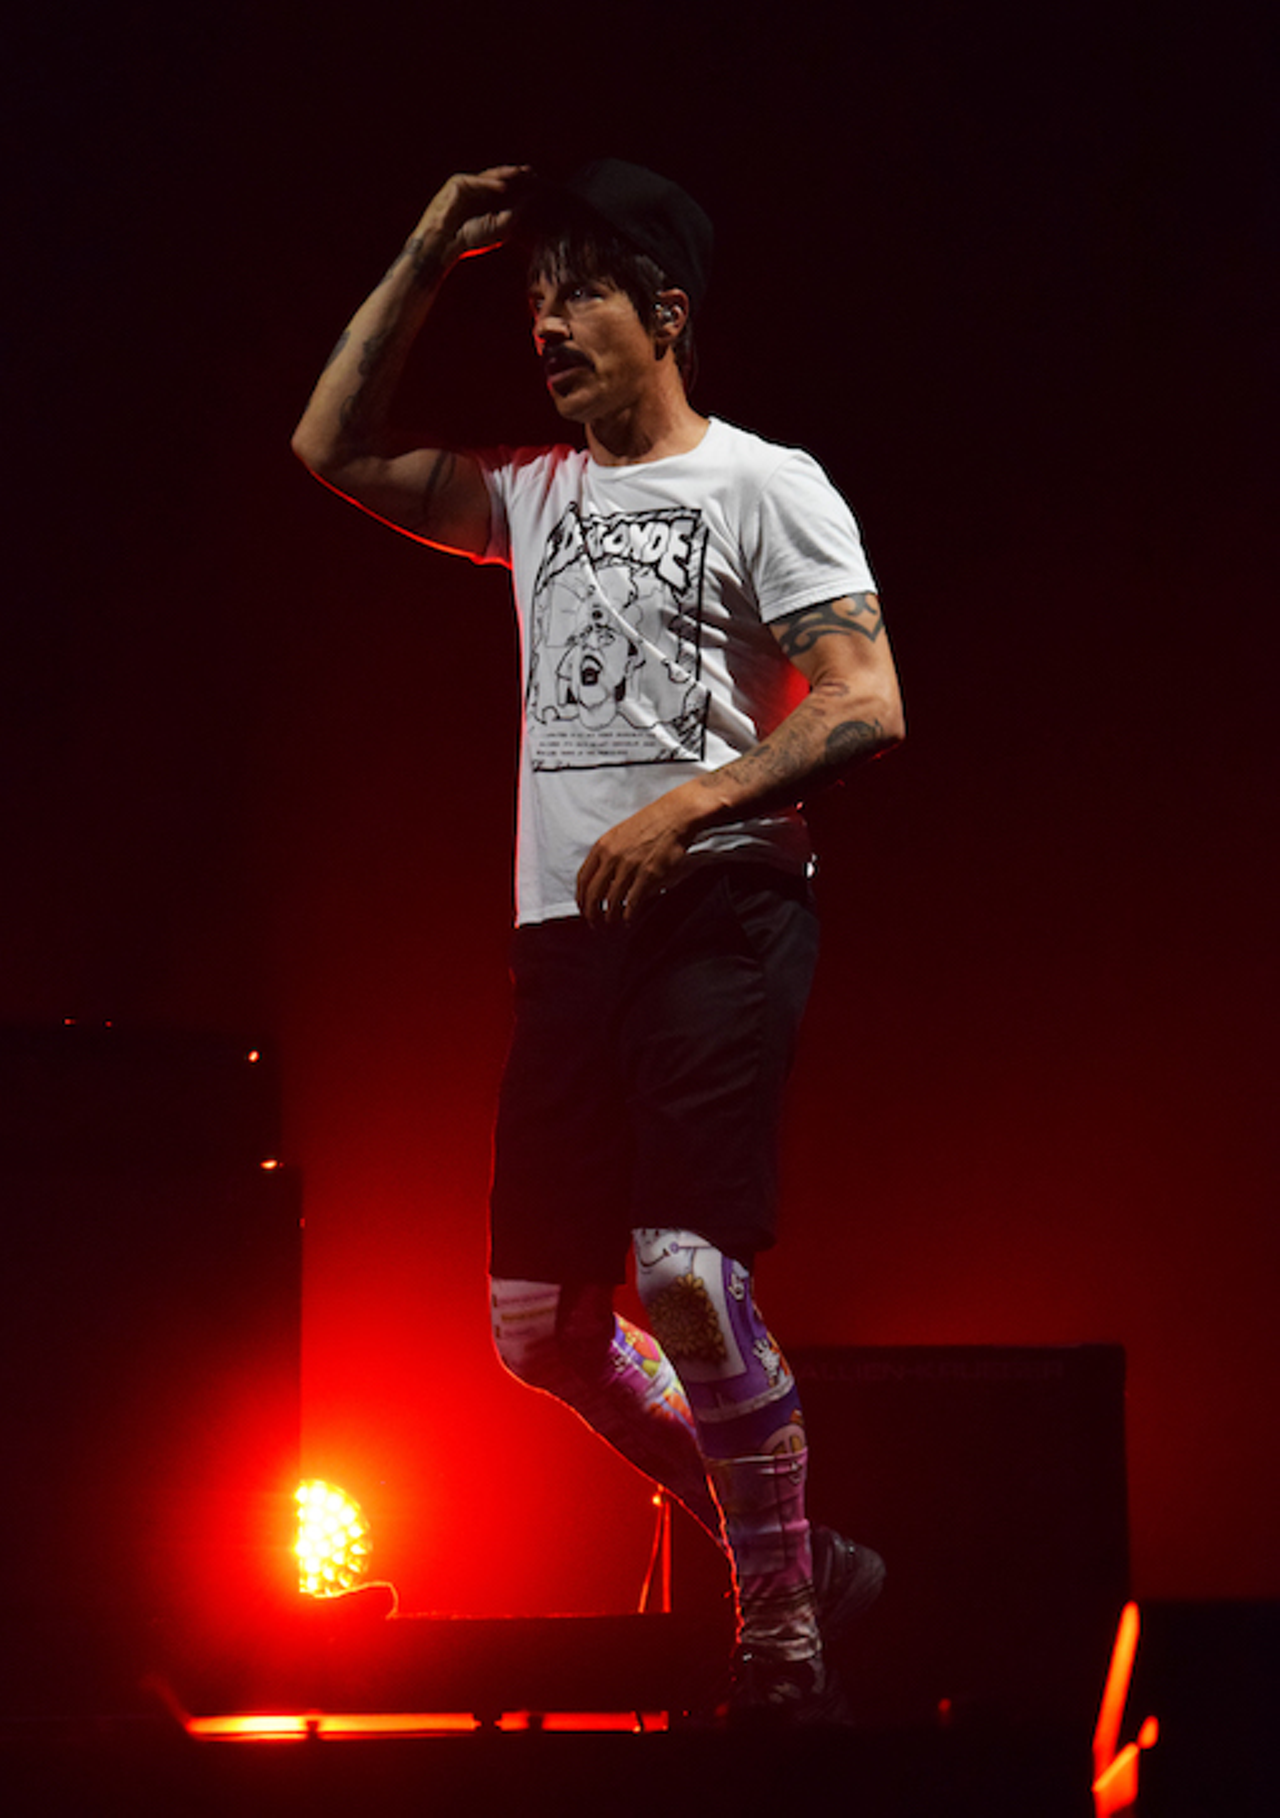 The Red Hot Chili Peppers play Amalie Arena in Tampa, Florida on April 27, 2017.